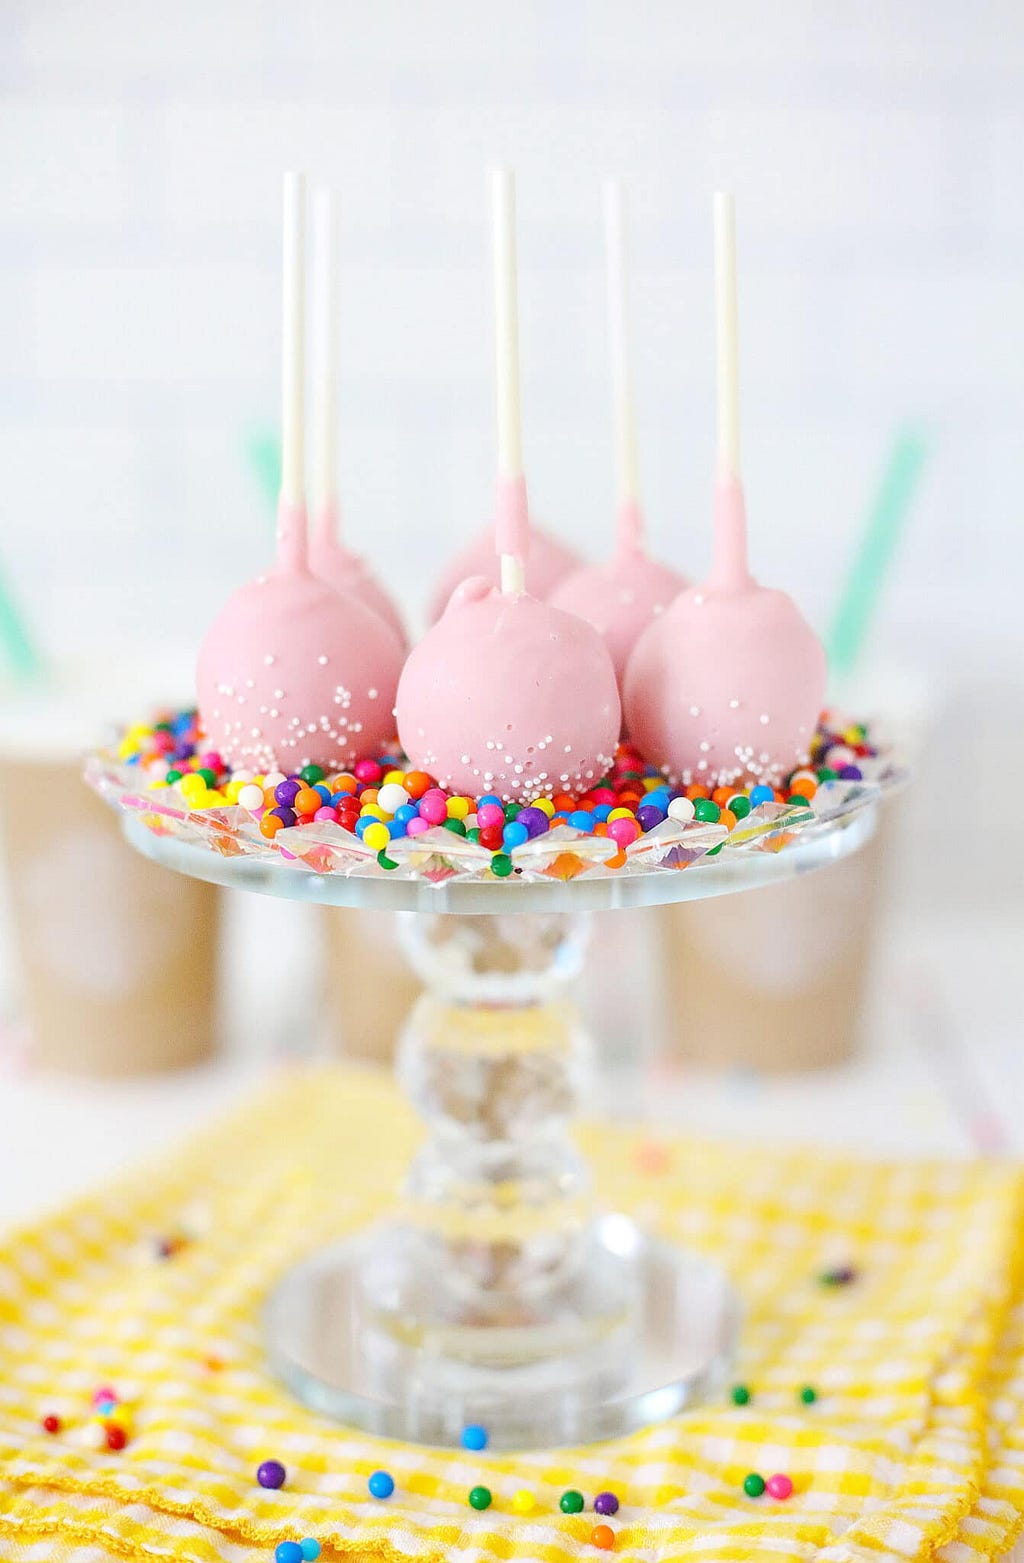 Finished Starbucks birthday cake pops arranged on a cake stand